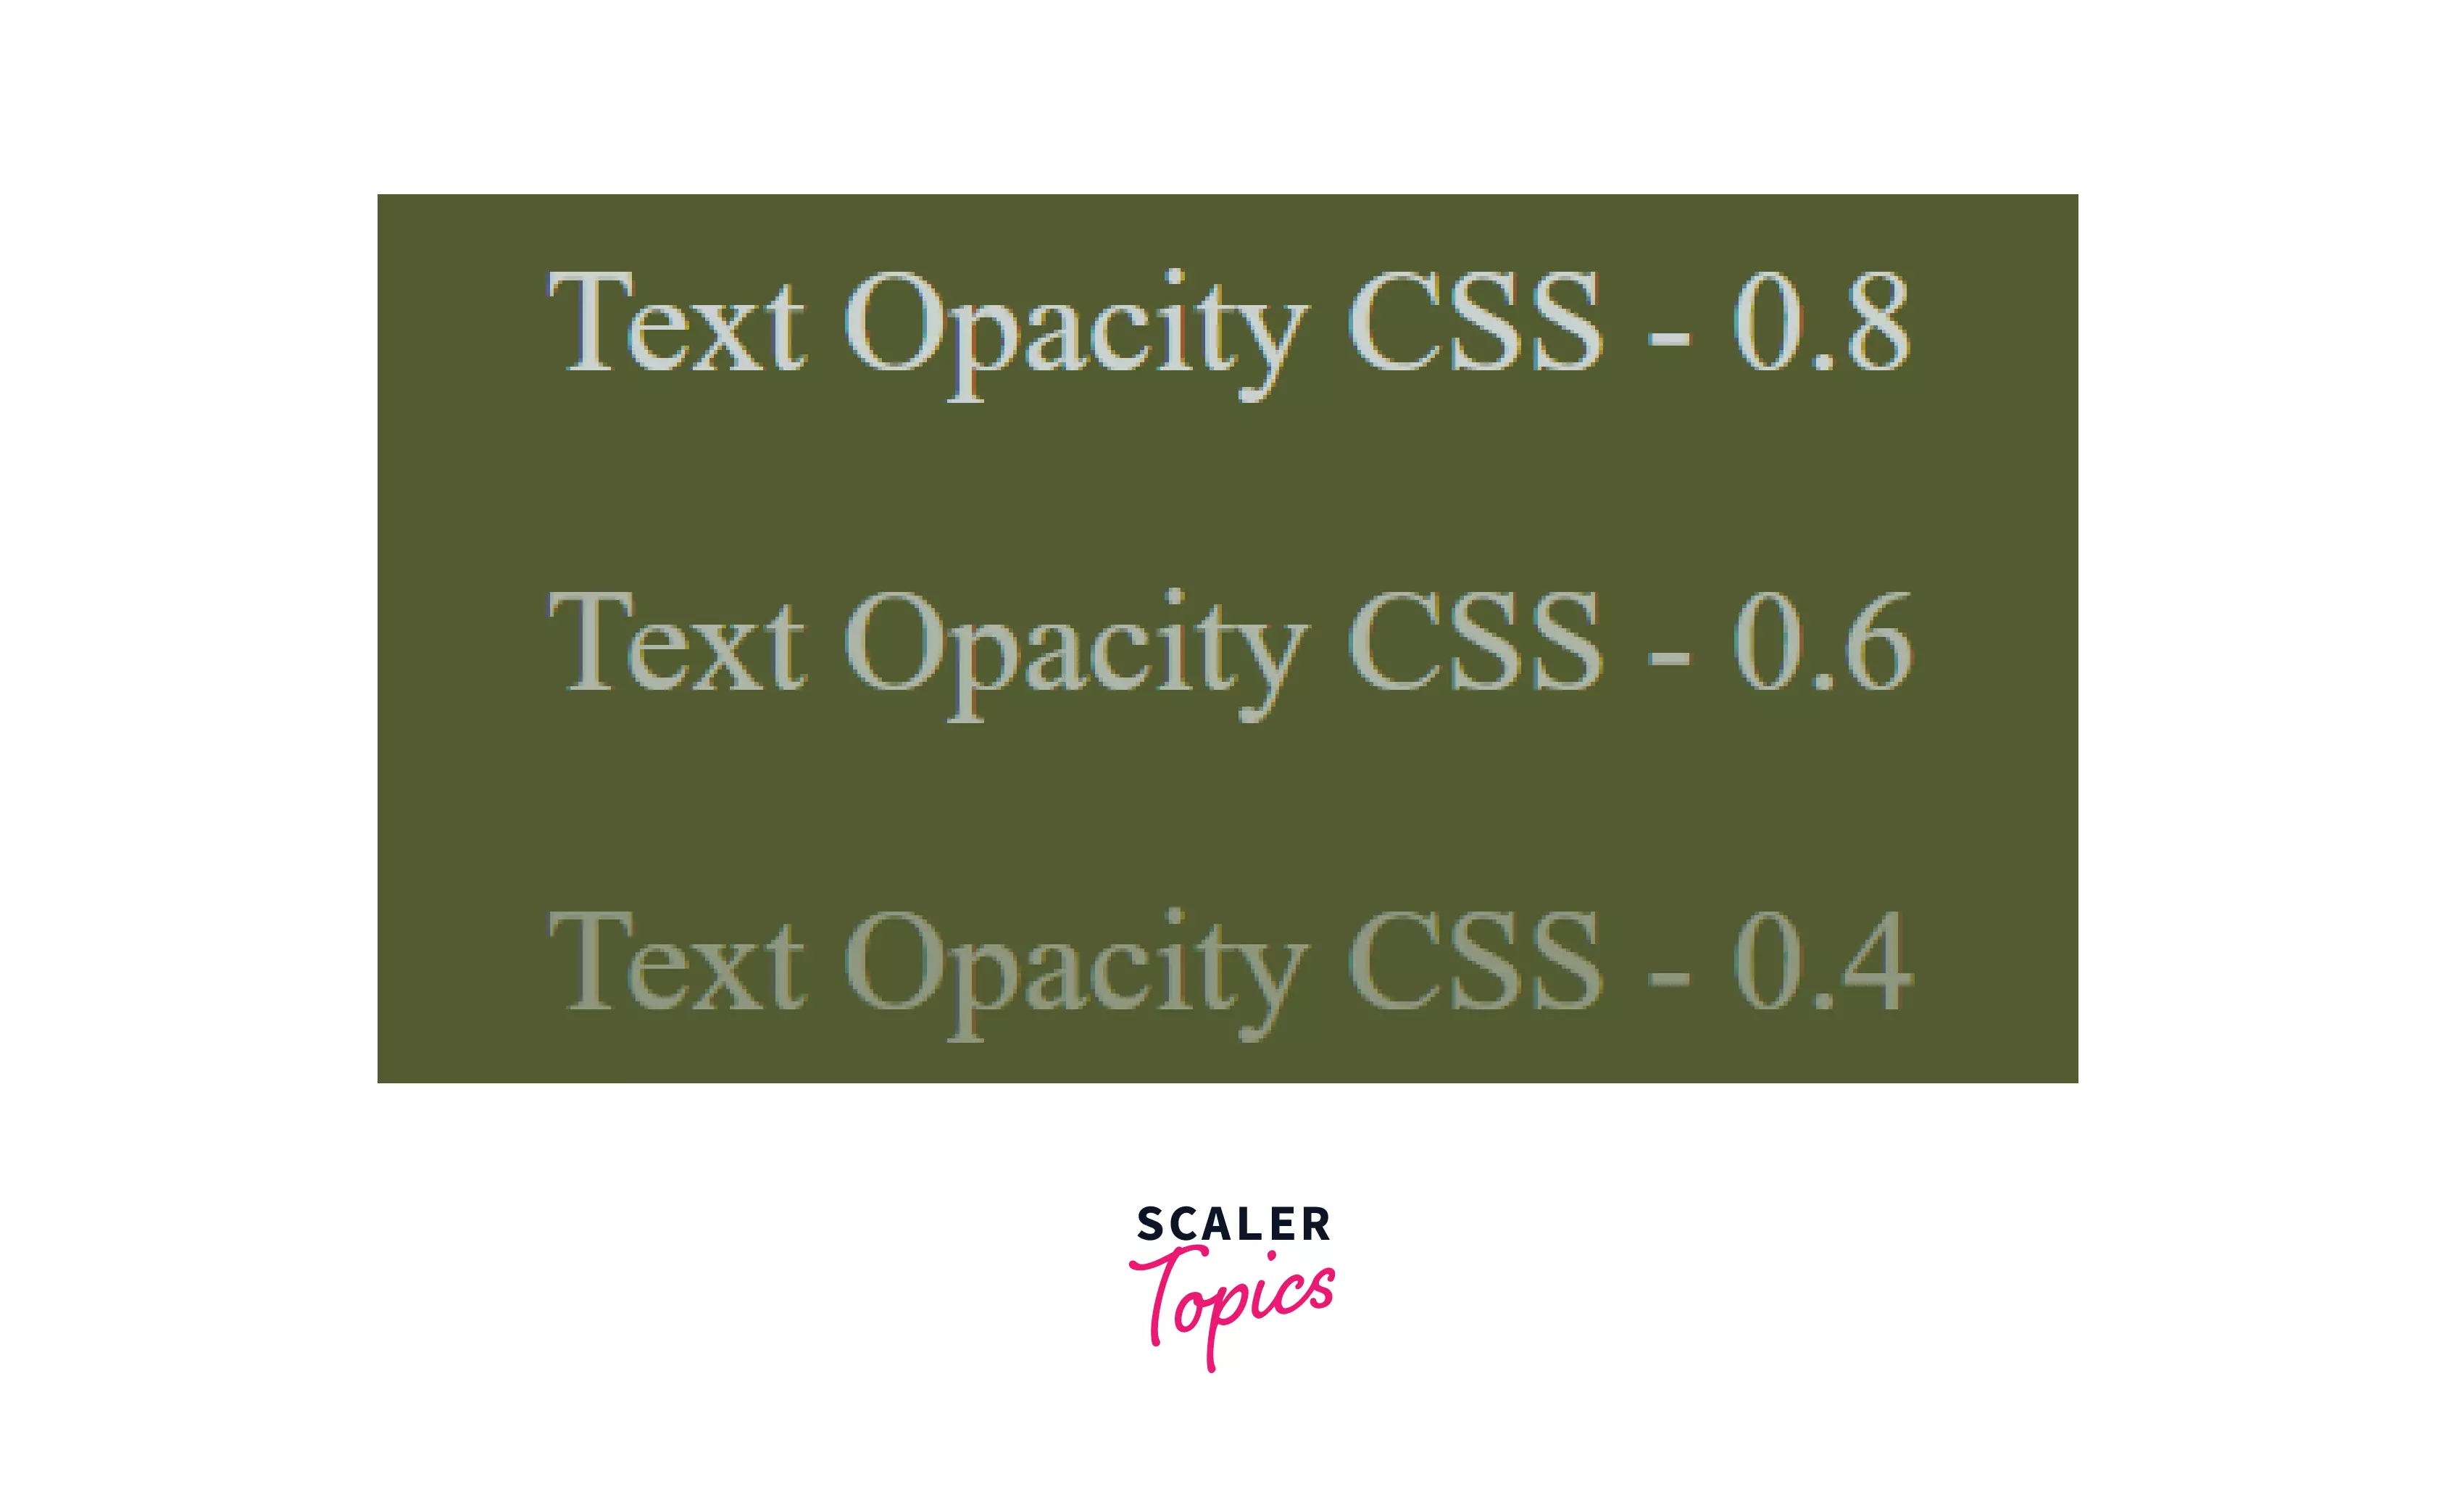 output of Text Opacity CSS